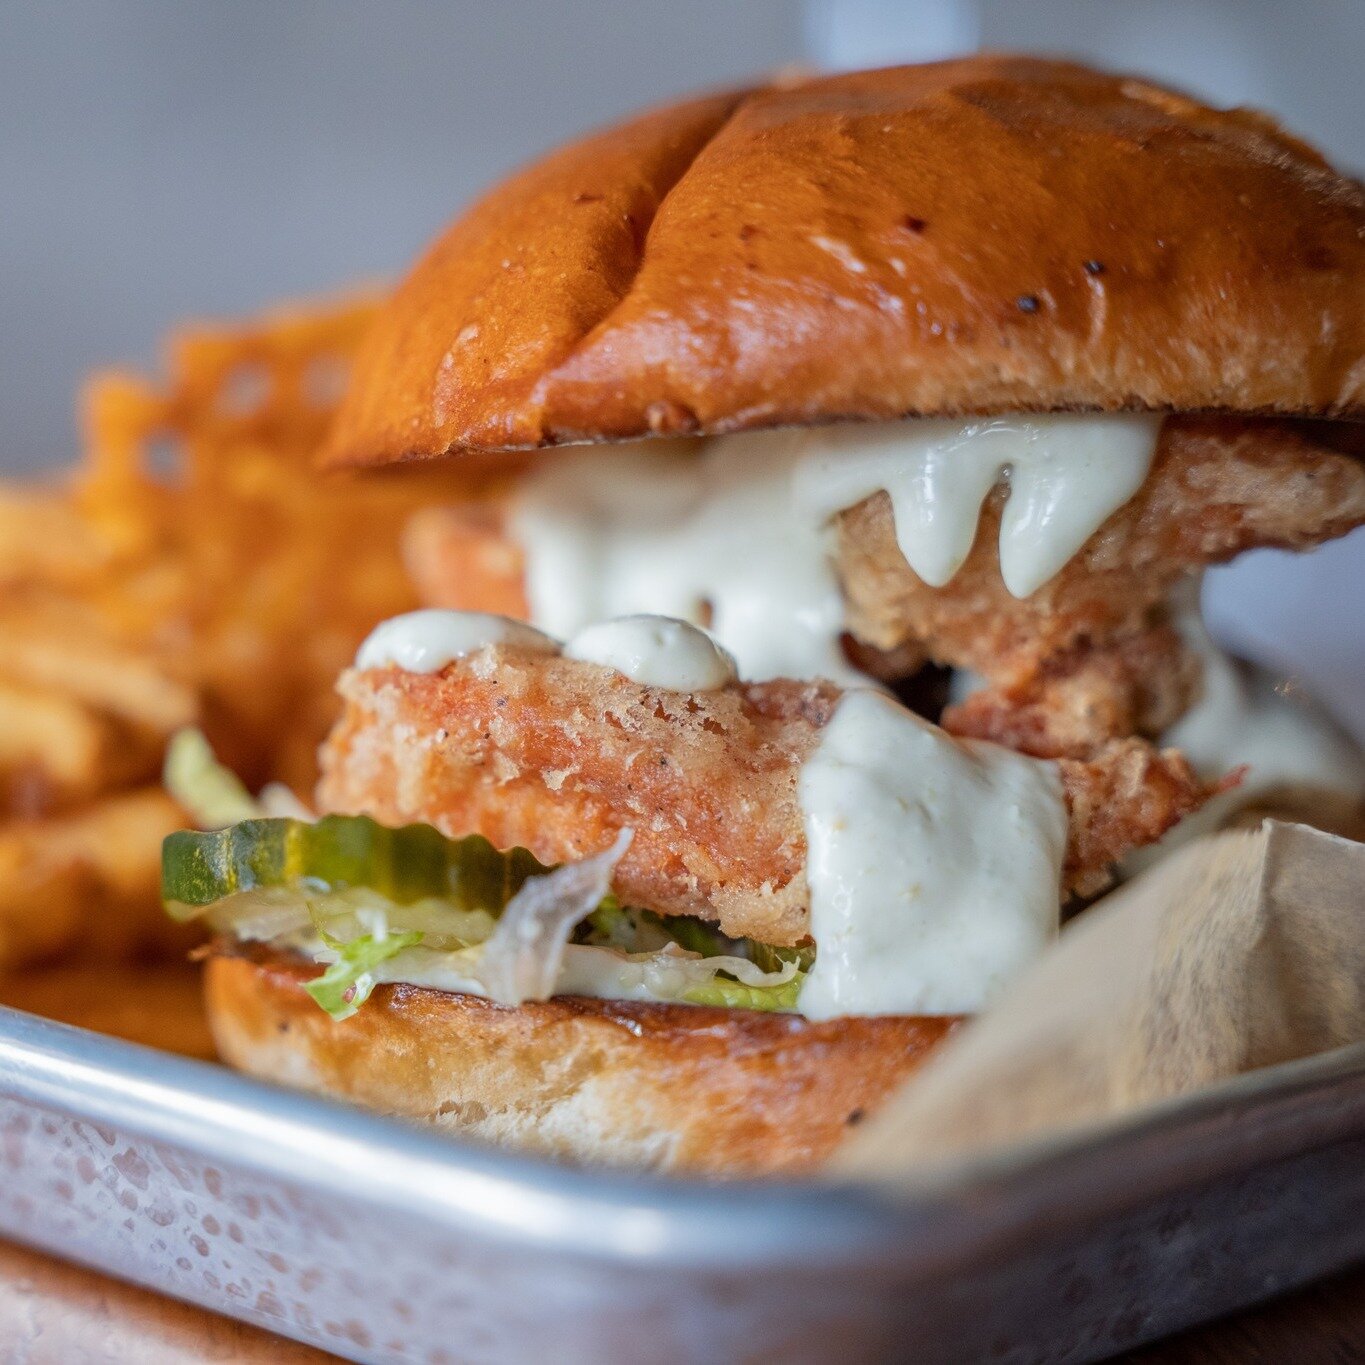 The Southern Fried Chicken Sandwich is crispy, juicy, and packed with flavor. 🐔🥪
#pipelinecrafttapsandkitchen #pipelinecrafttaps #pipelinemtshasta #mtshastaeats #visitmtshasta #seesiskiyou  #craftbeer